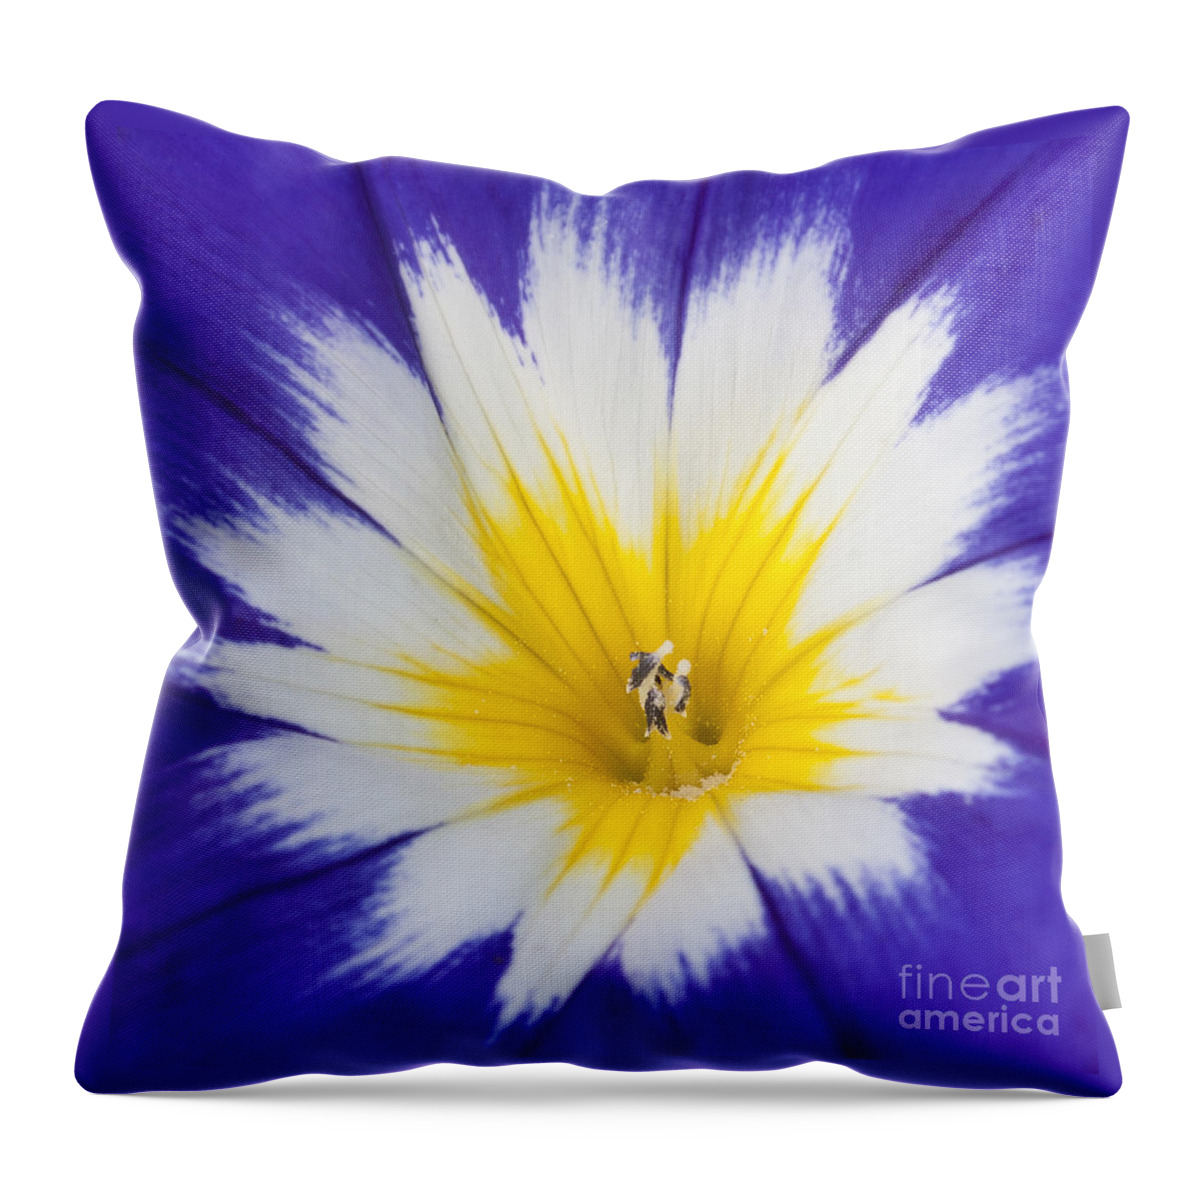 Let The Sun Shine Throw Pillow featuring the photograph Let the Sun Shine by Patty Colabuono